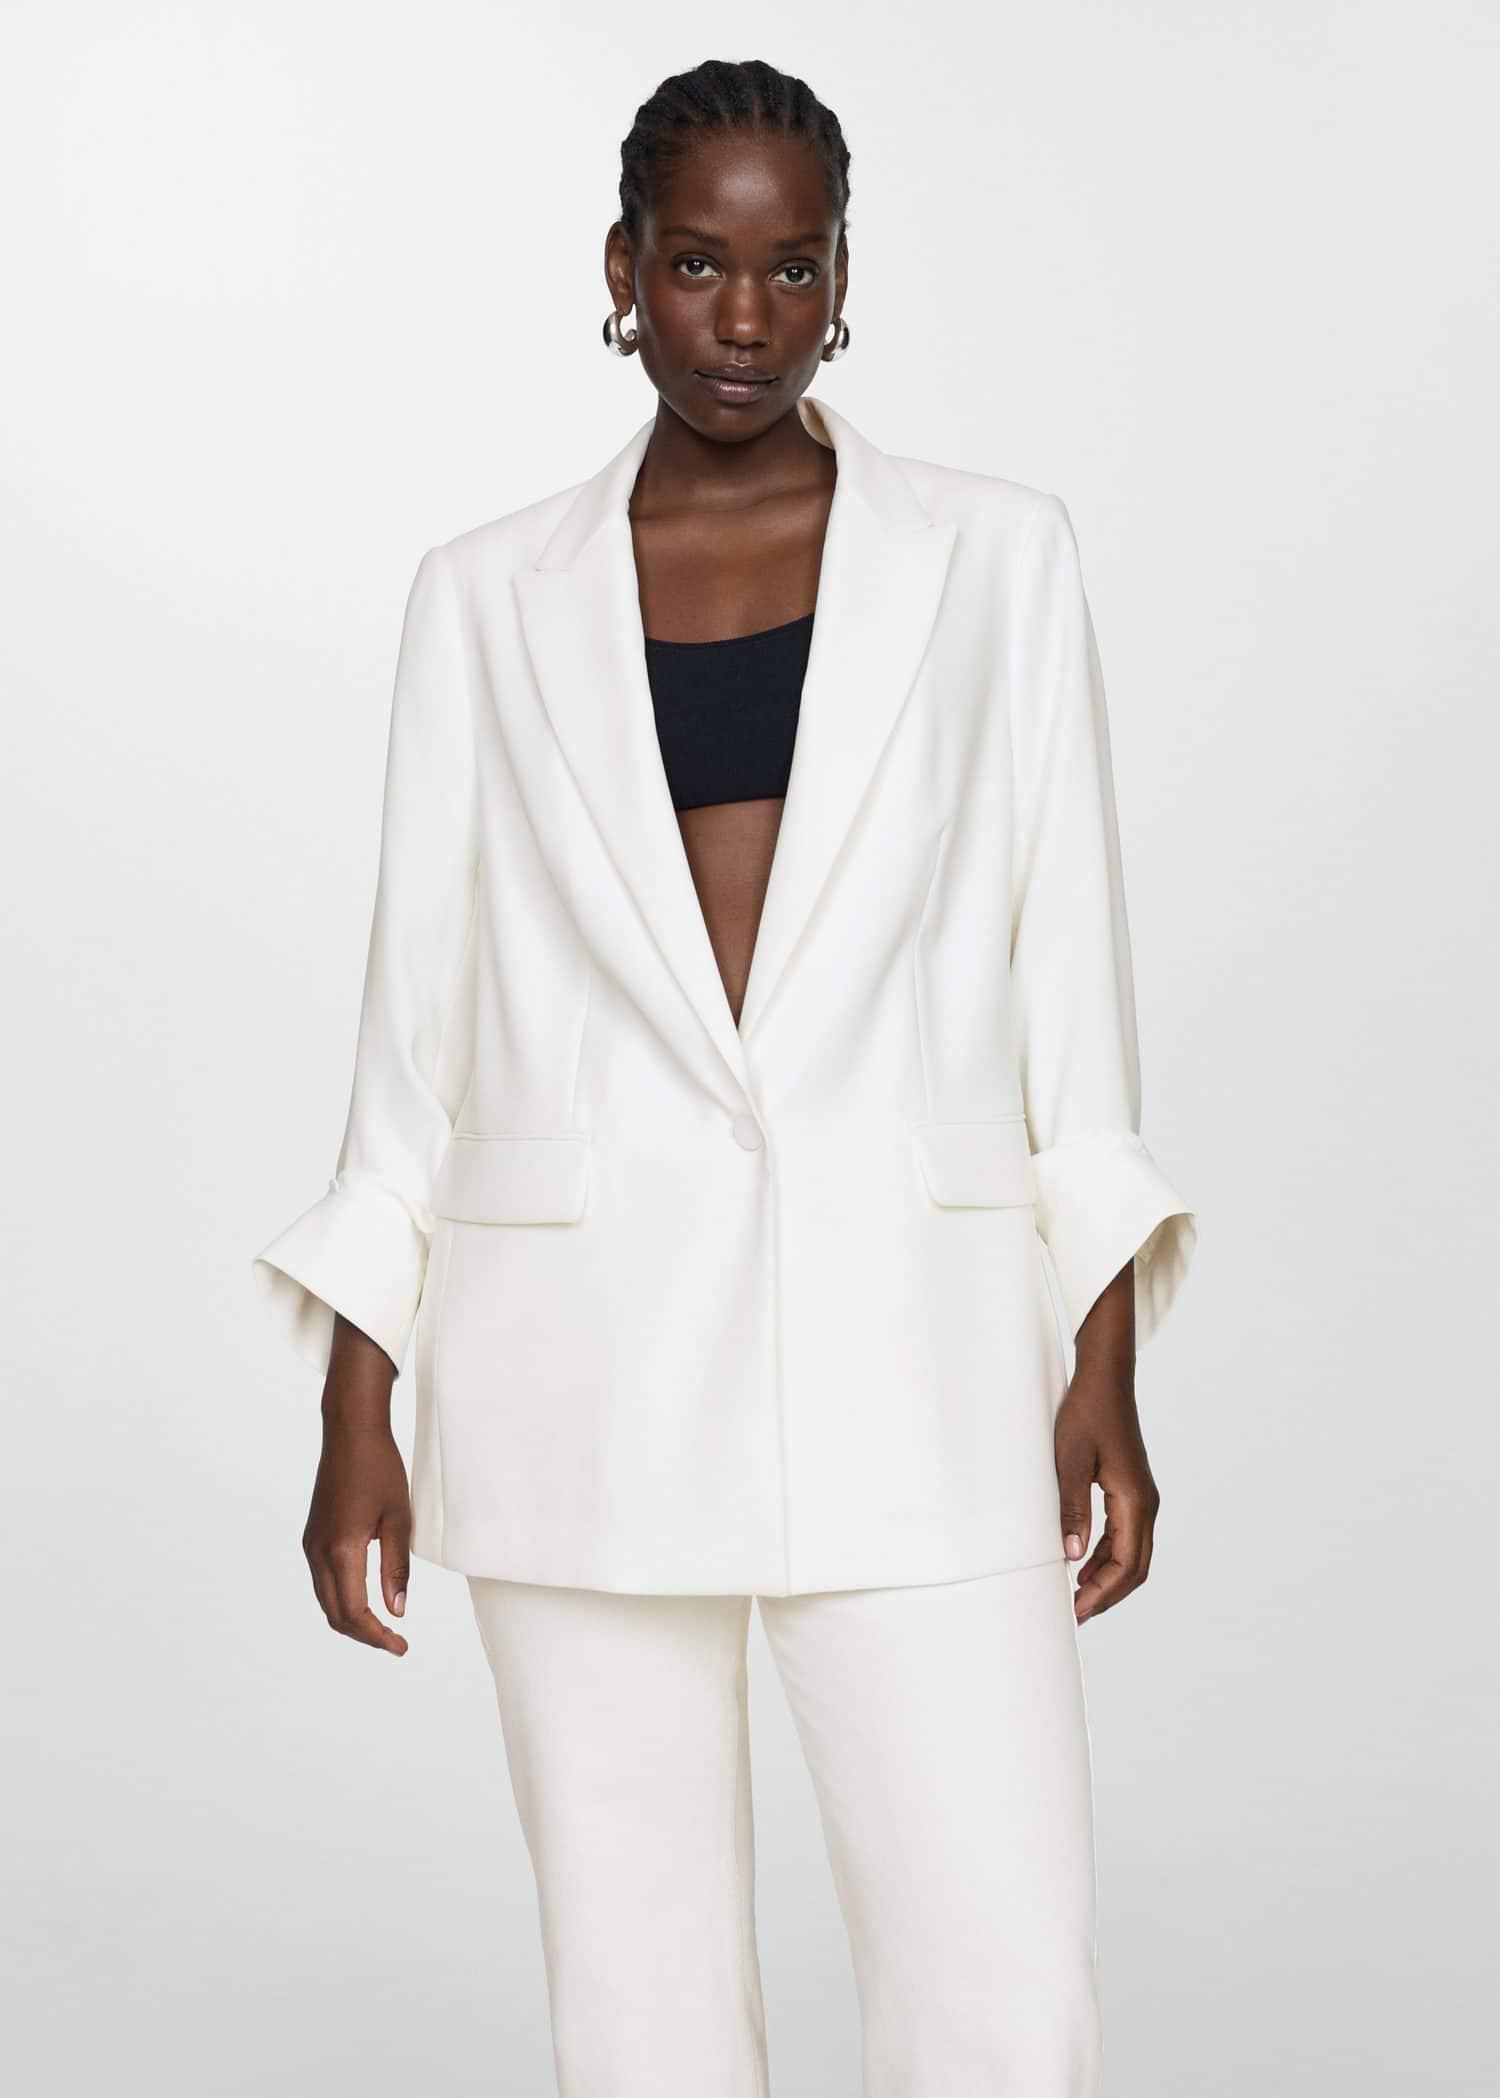 Mango - Beige Tailored Jacket With Turn-Down Sleeves